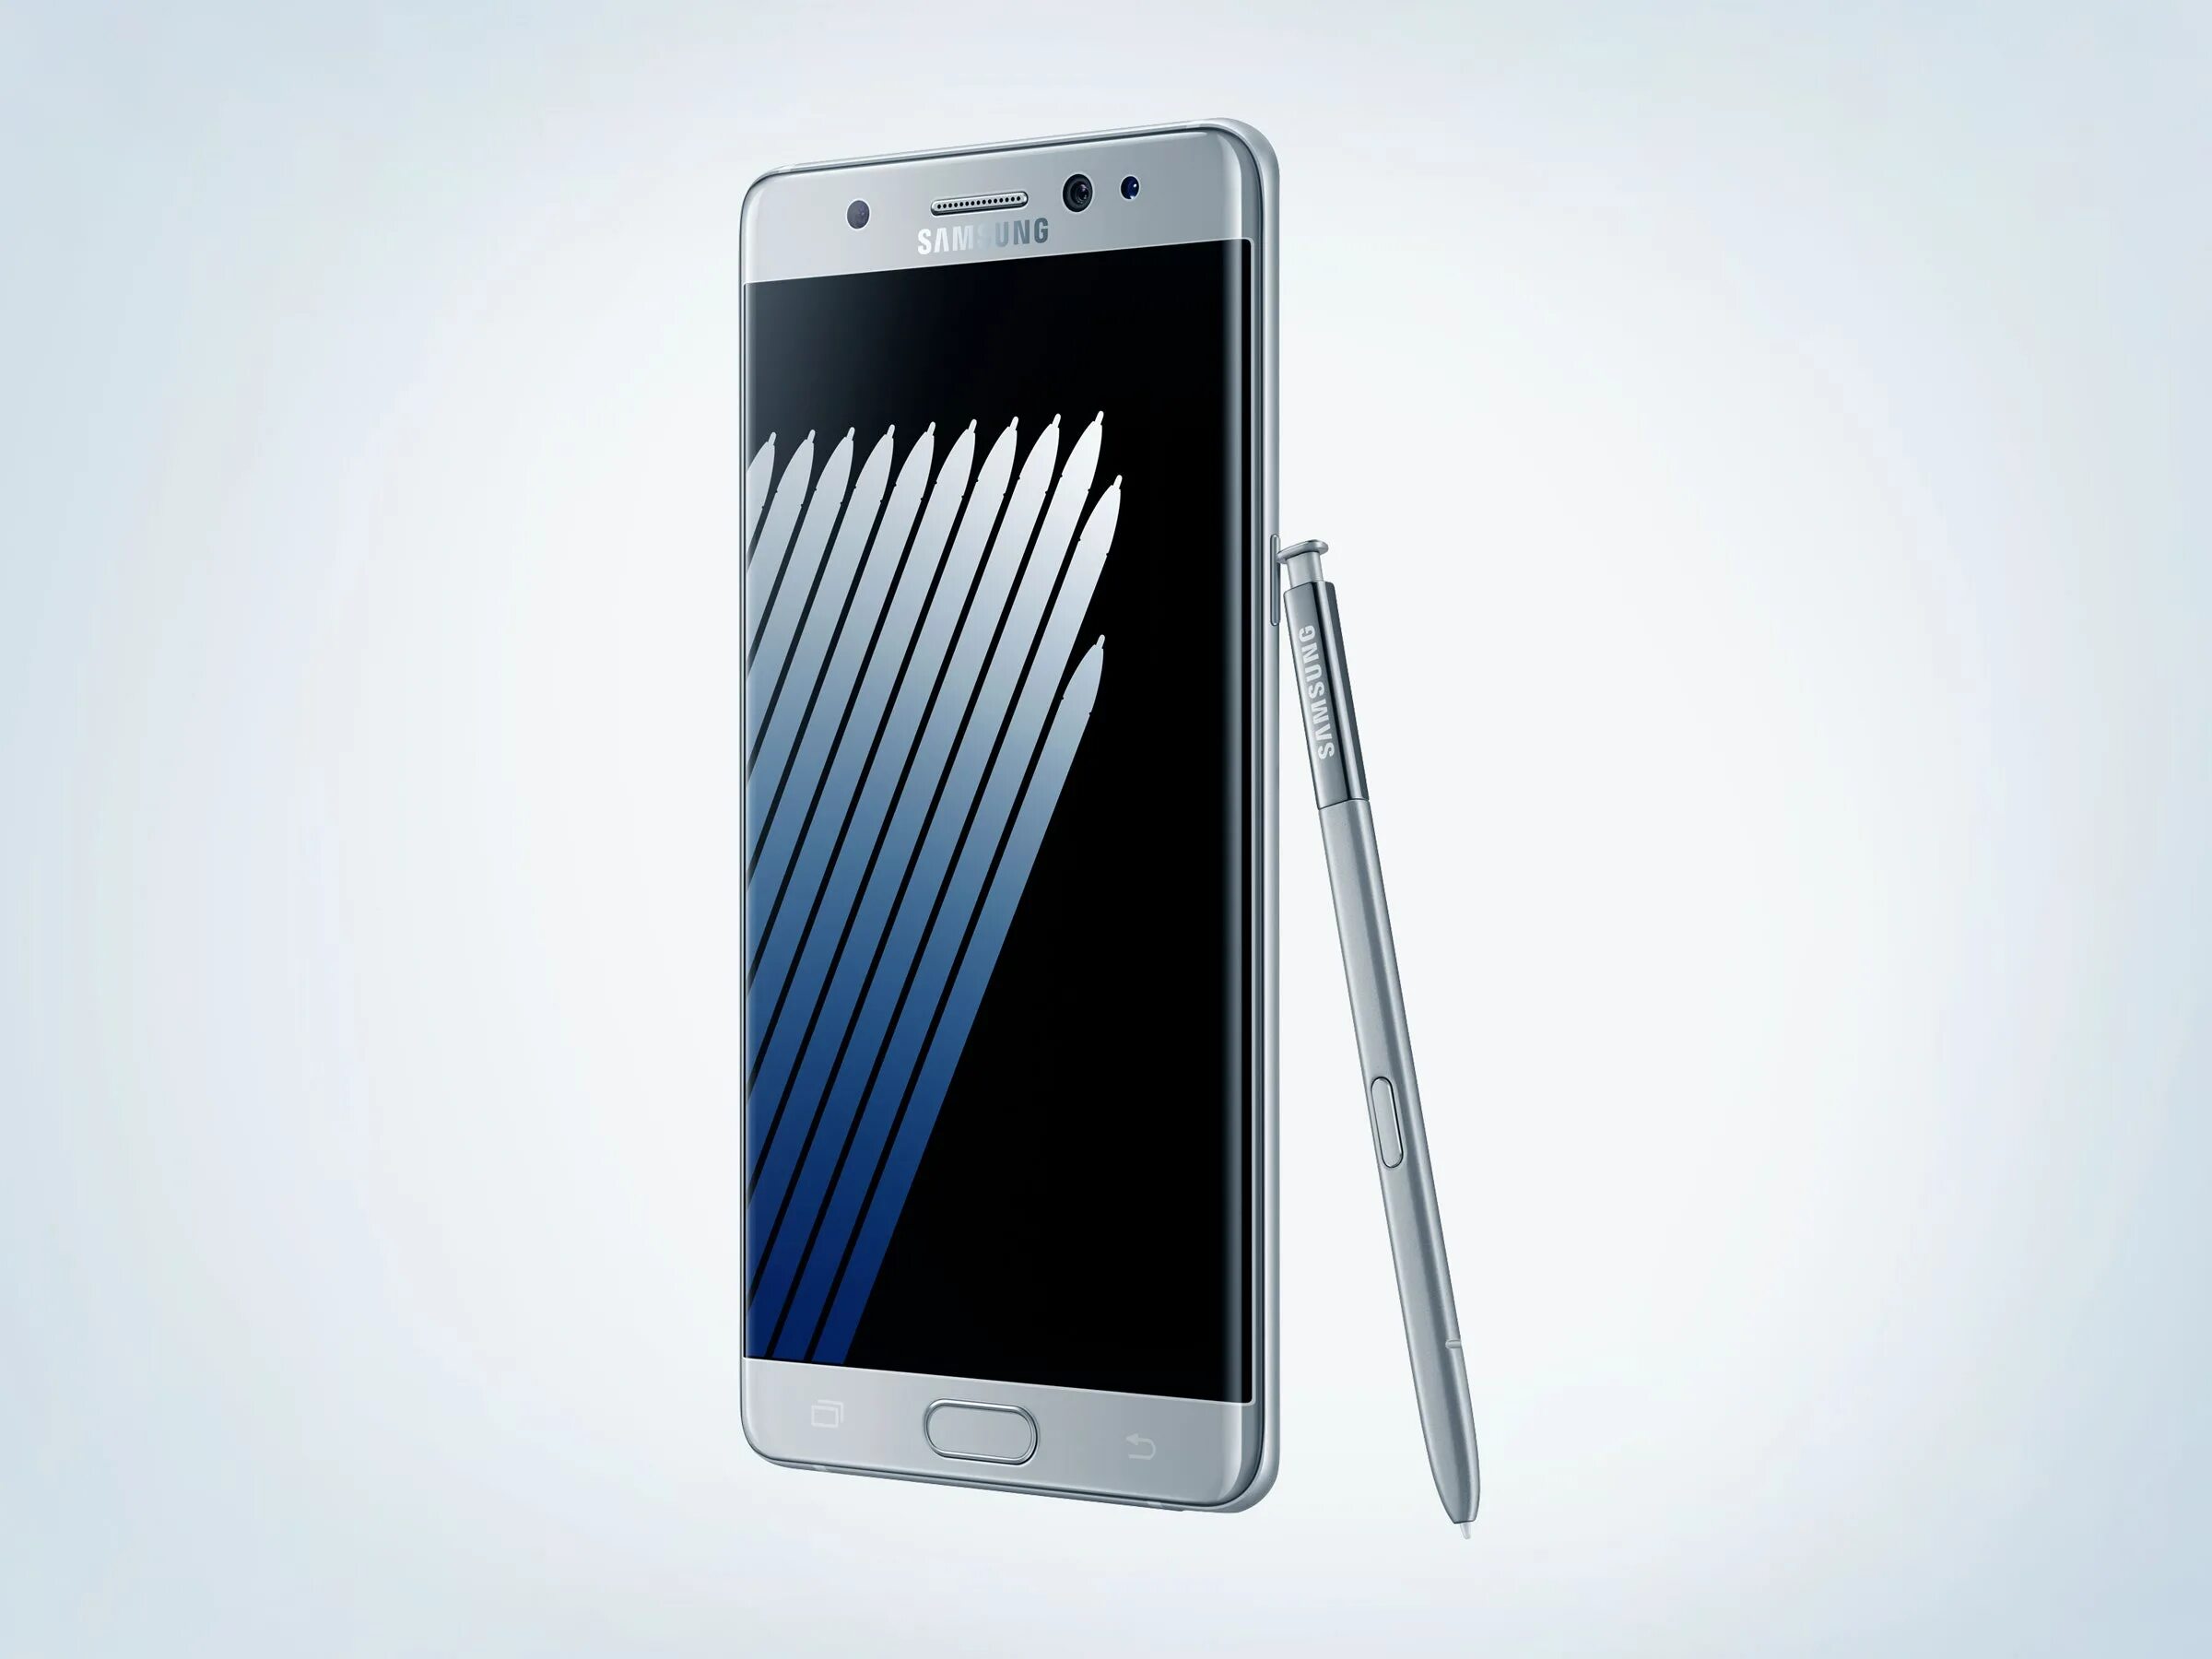 Samsung Note 7. Самсунг галакси ноут 7. Samsung Galaxy Note 7 Pro. Samsung Galaxy s 7 Note. Samsung note 24